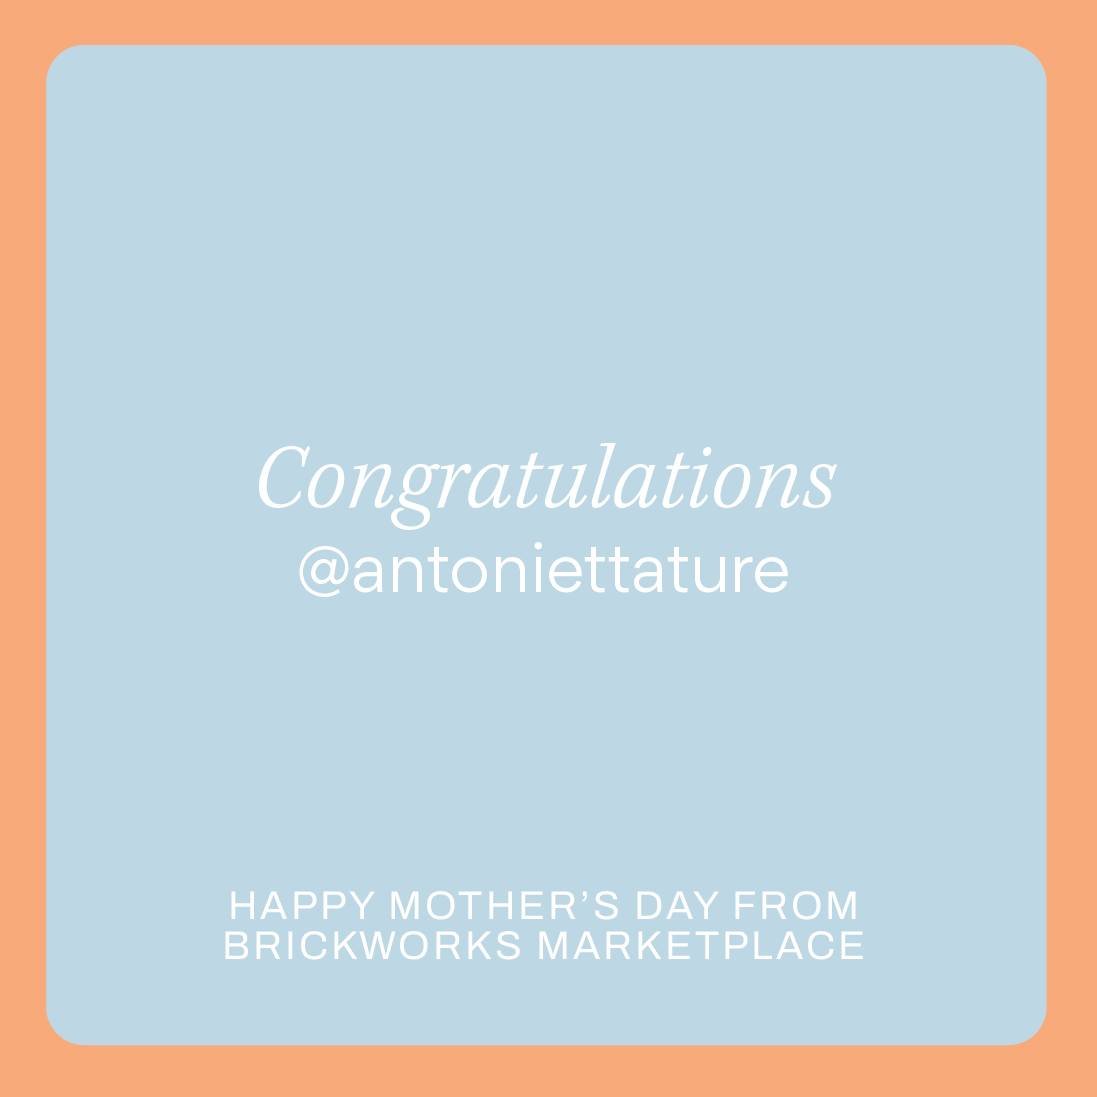 Congratulations @antoniettature you're the lucky winner of our Mother's Day Competition! 💞🍾🎉

Please send Brickworks Marketplace a message for instructions on how to collect your prize.